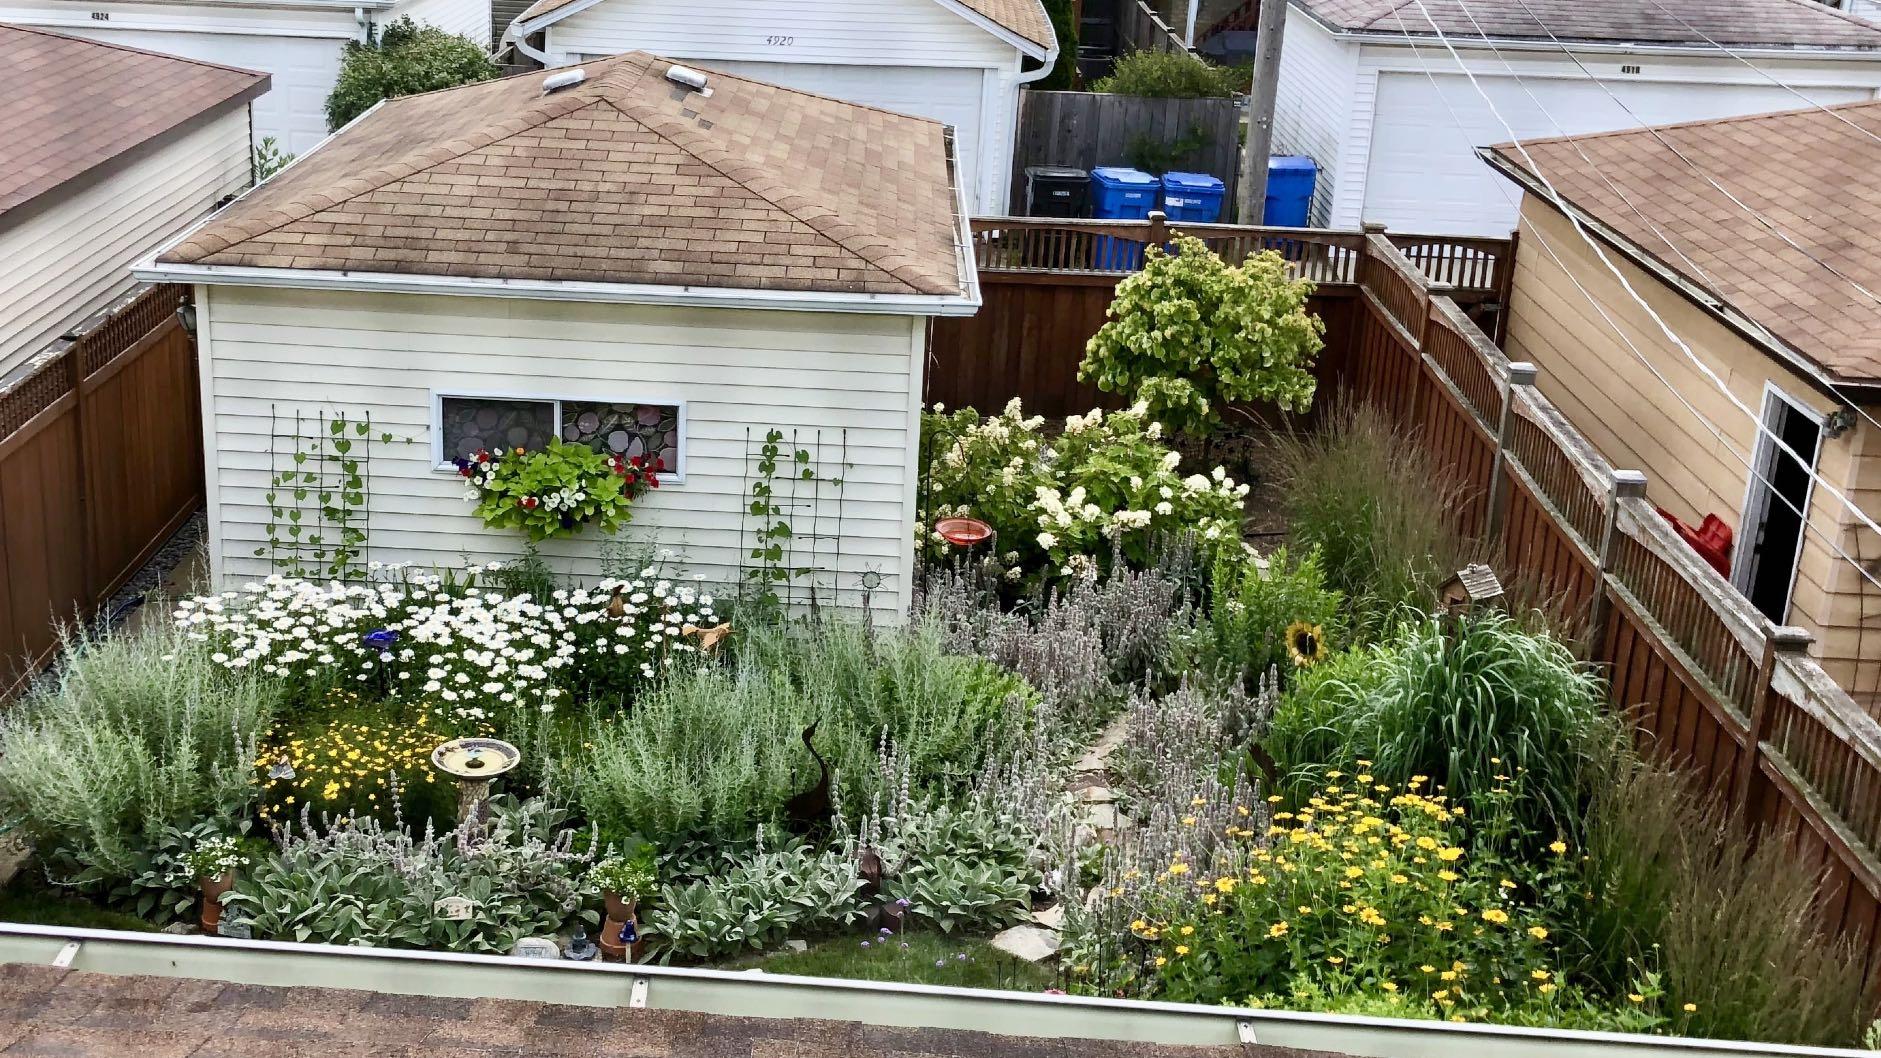 The 2020 winner in the rear/side garden category. (Courtesy of Chicago Bungalow Association)